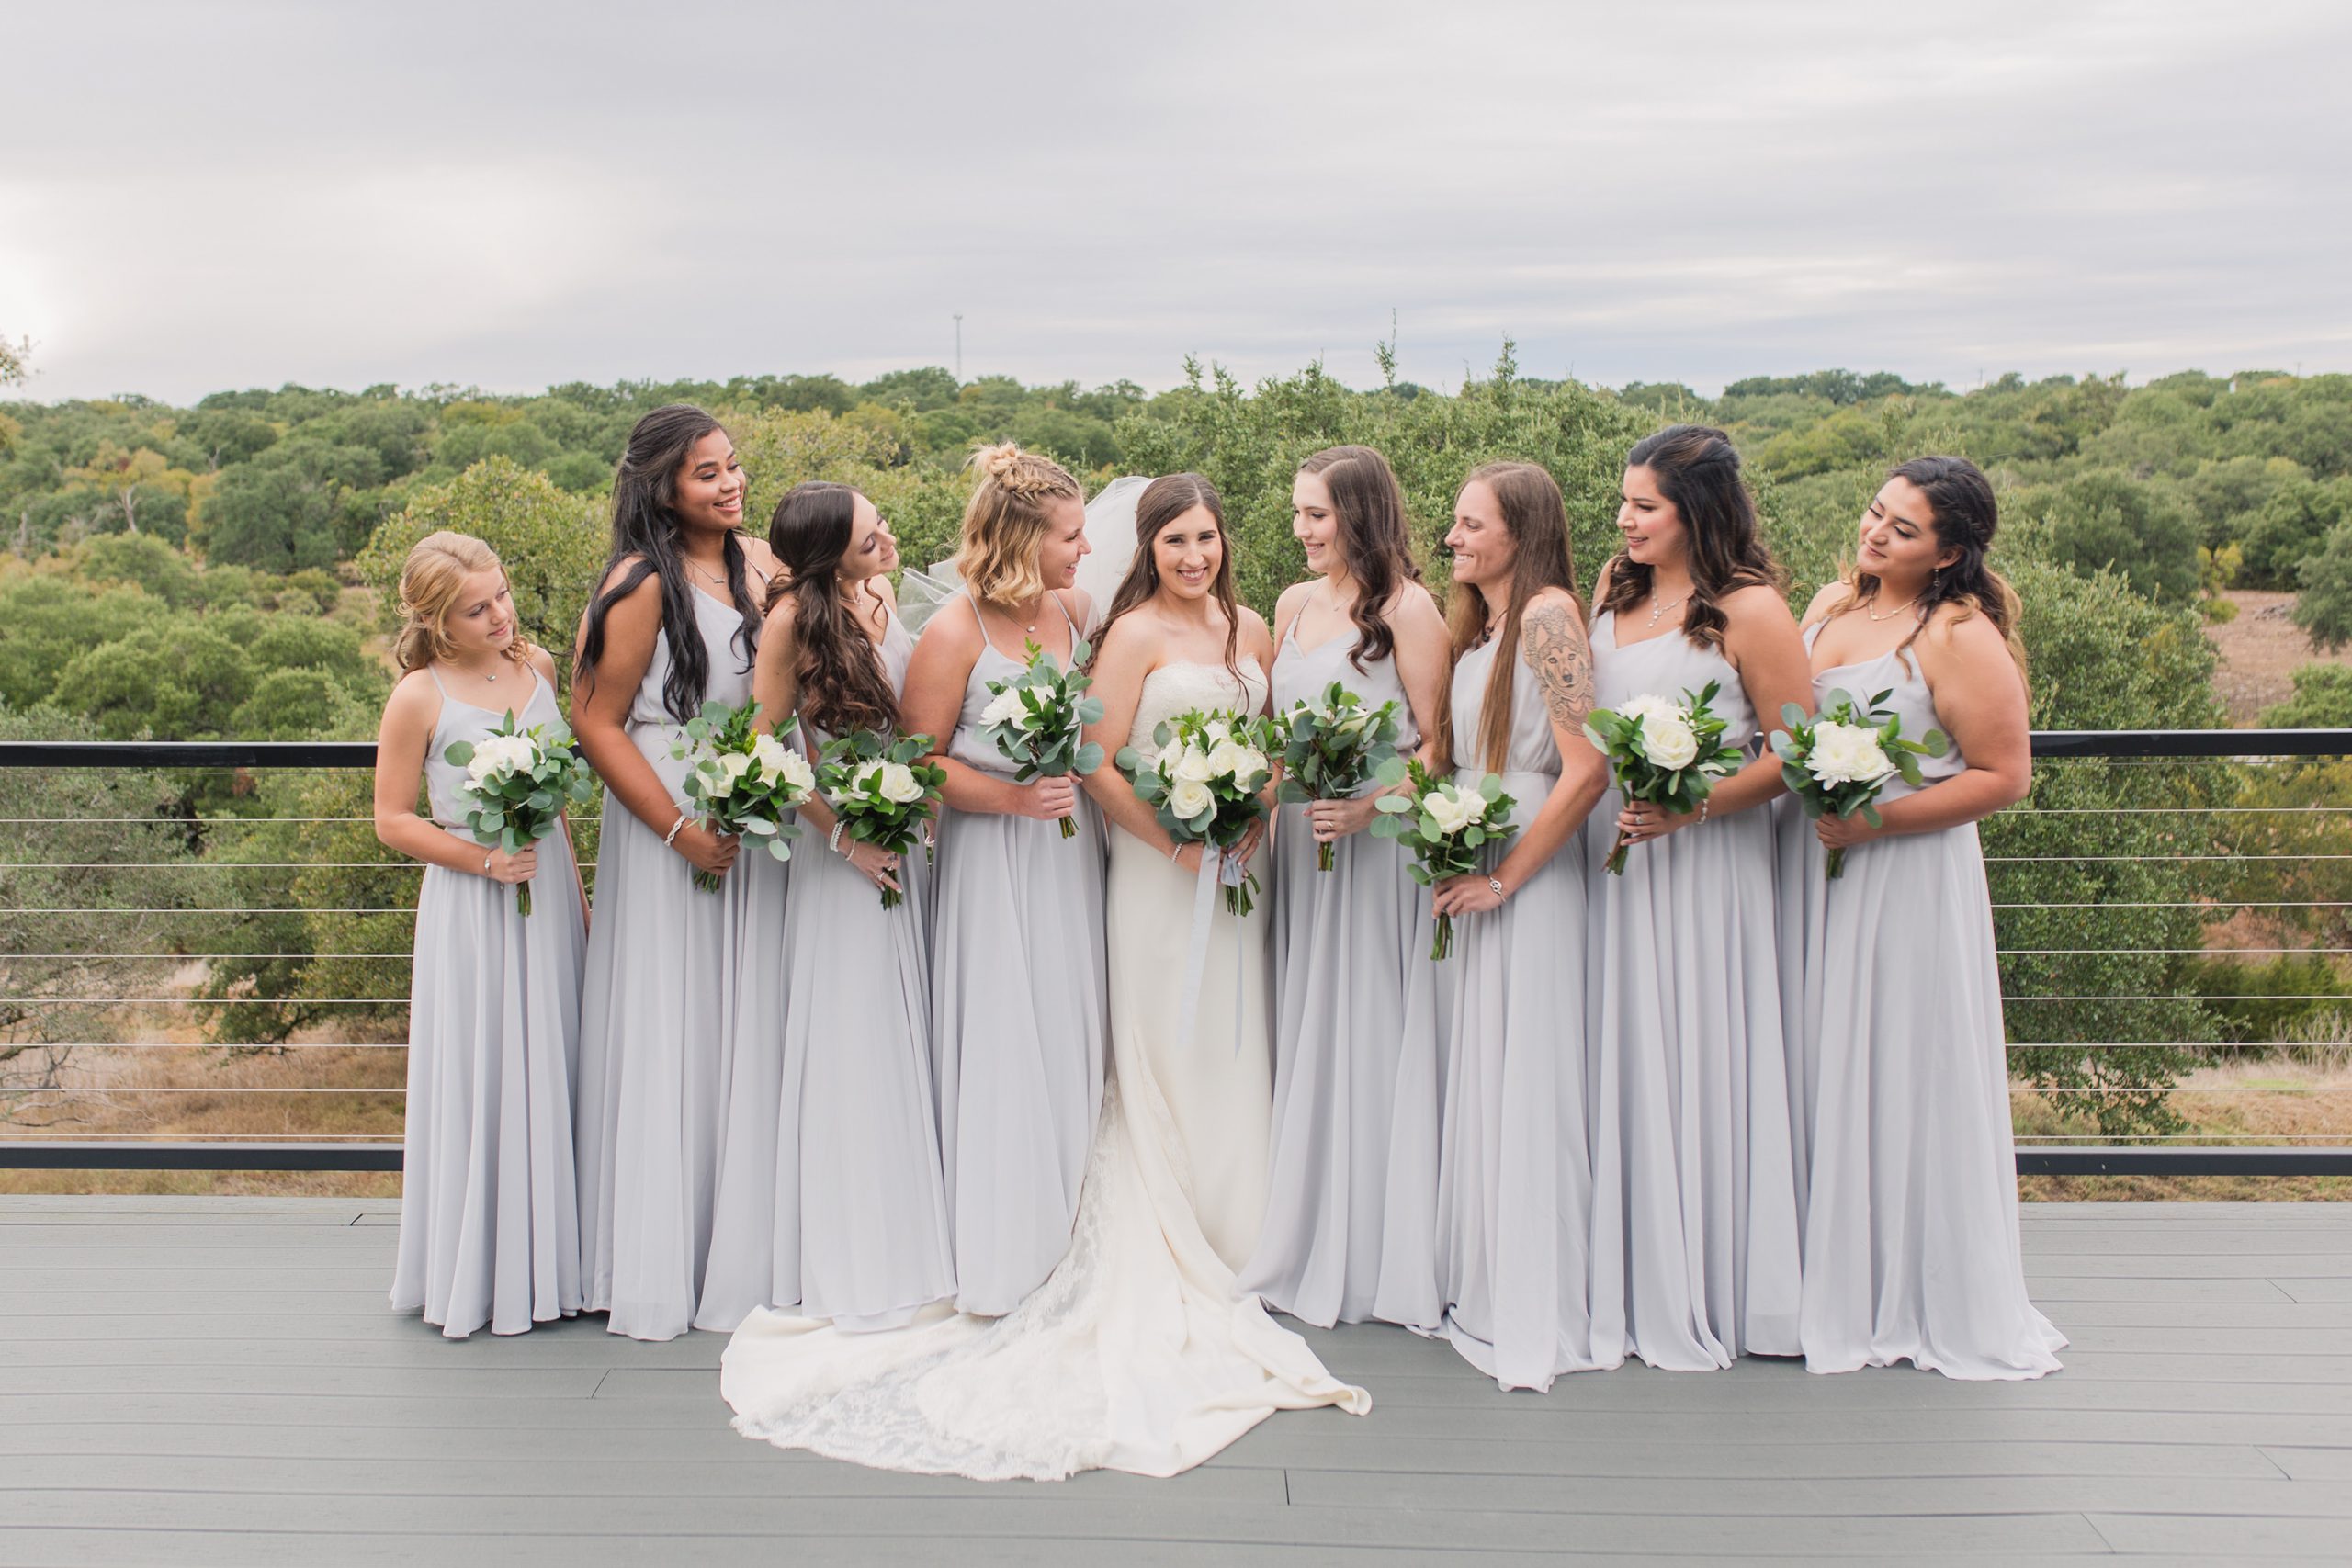 http://www.laurengarrisonphotography.com/wp-content/uploads/sites/5816/2020/04/A-Bride-and-Grooms-Guide-to-Leading-Your-Wedding-Party-scaled.jpg